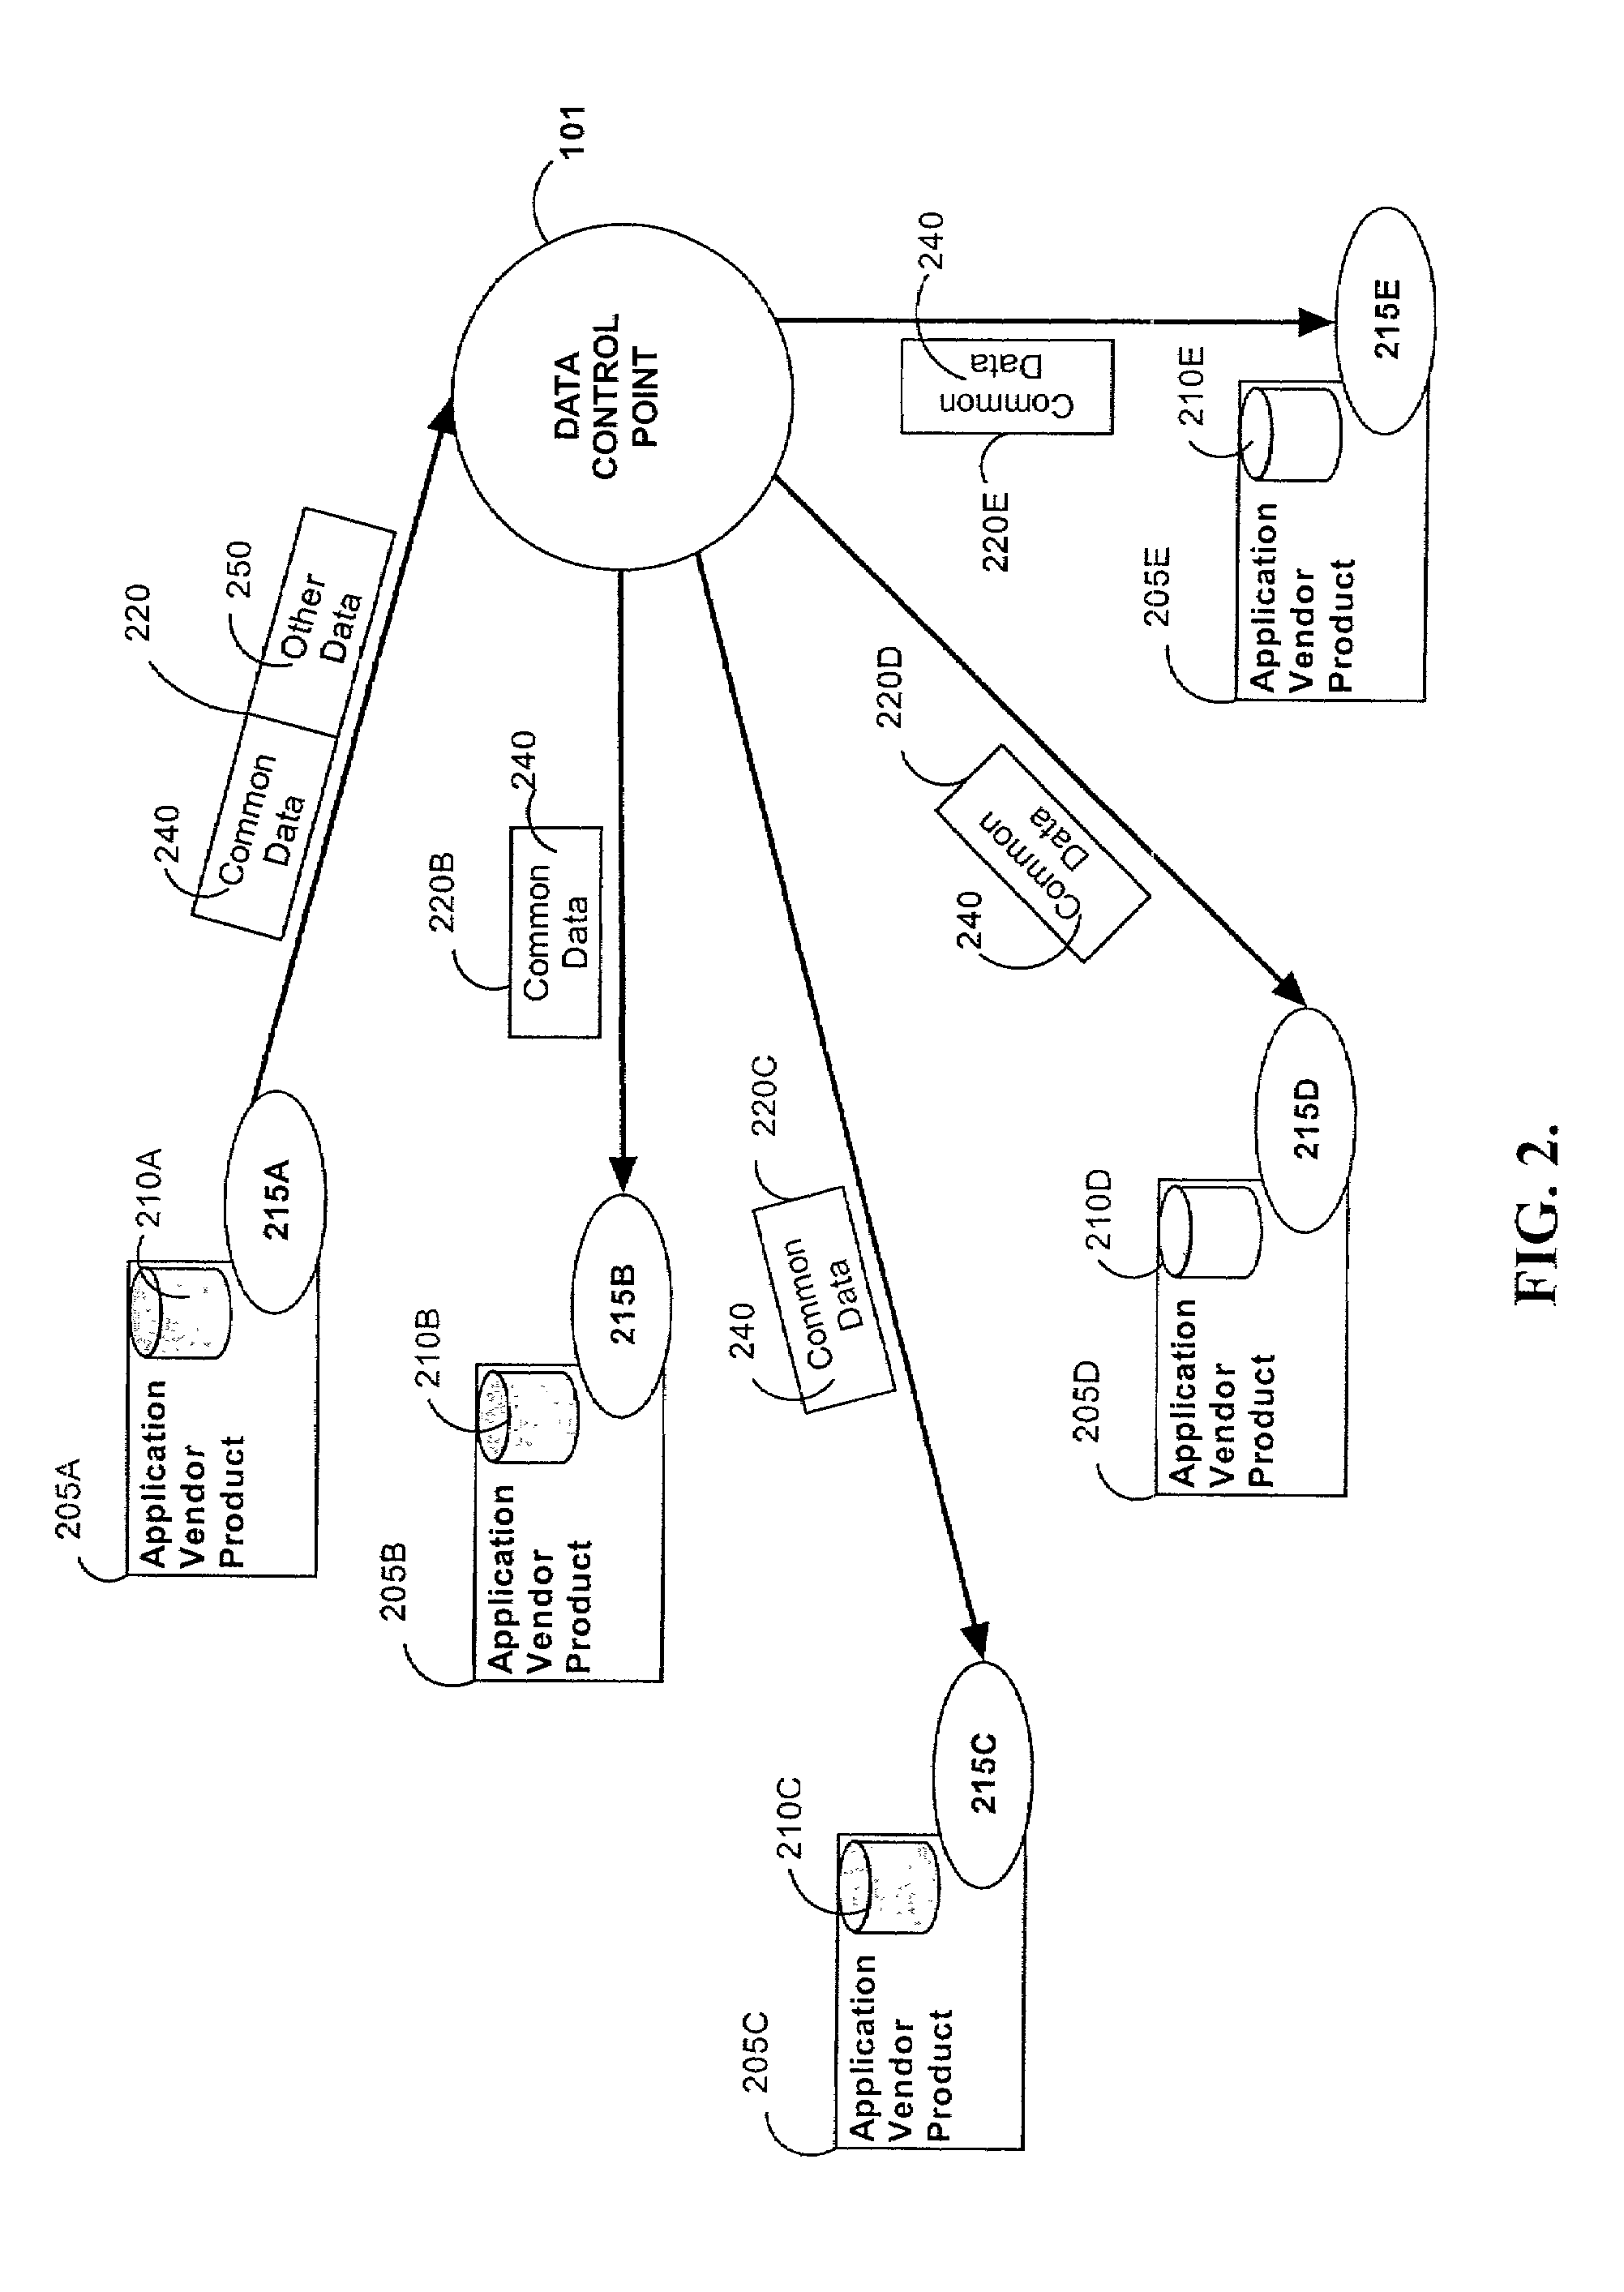 Method and apparatus for ensuring data consistency amongst a plurality of disparate systems having multiple consumer channels